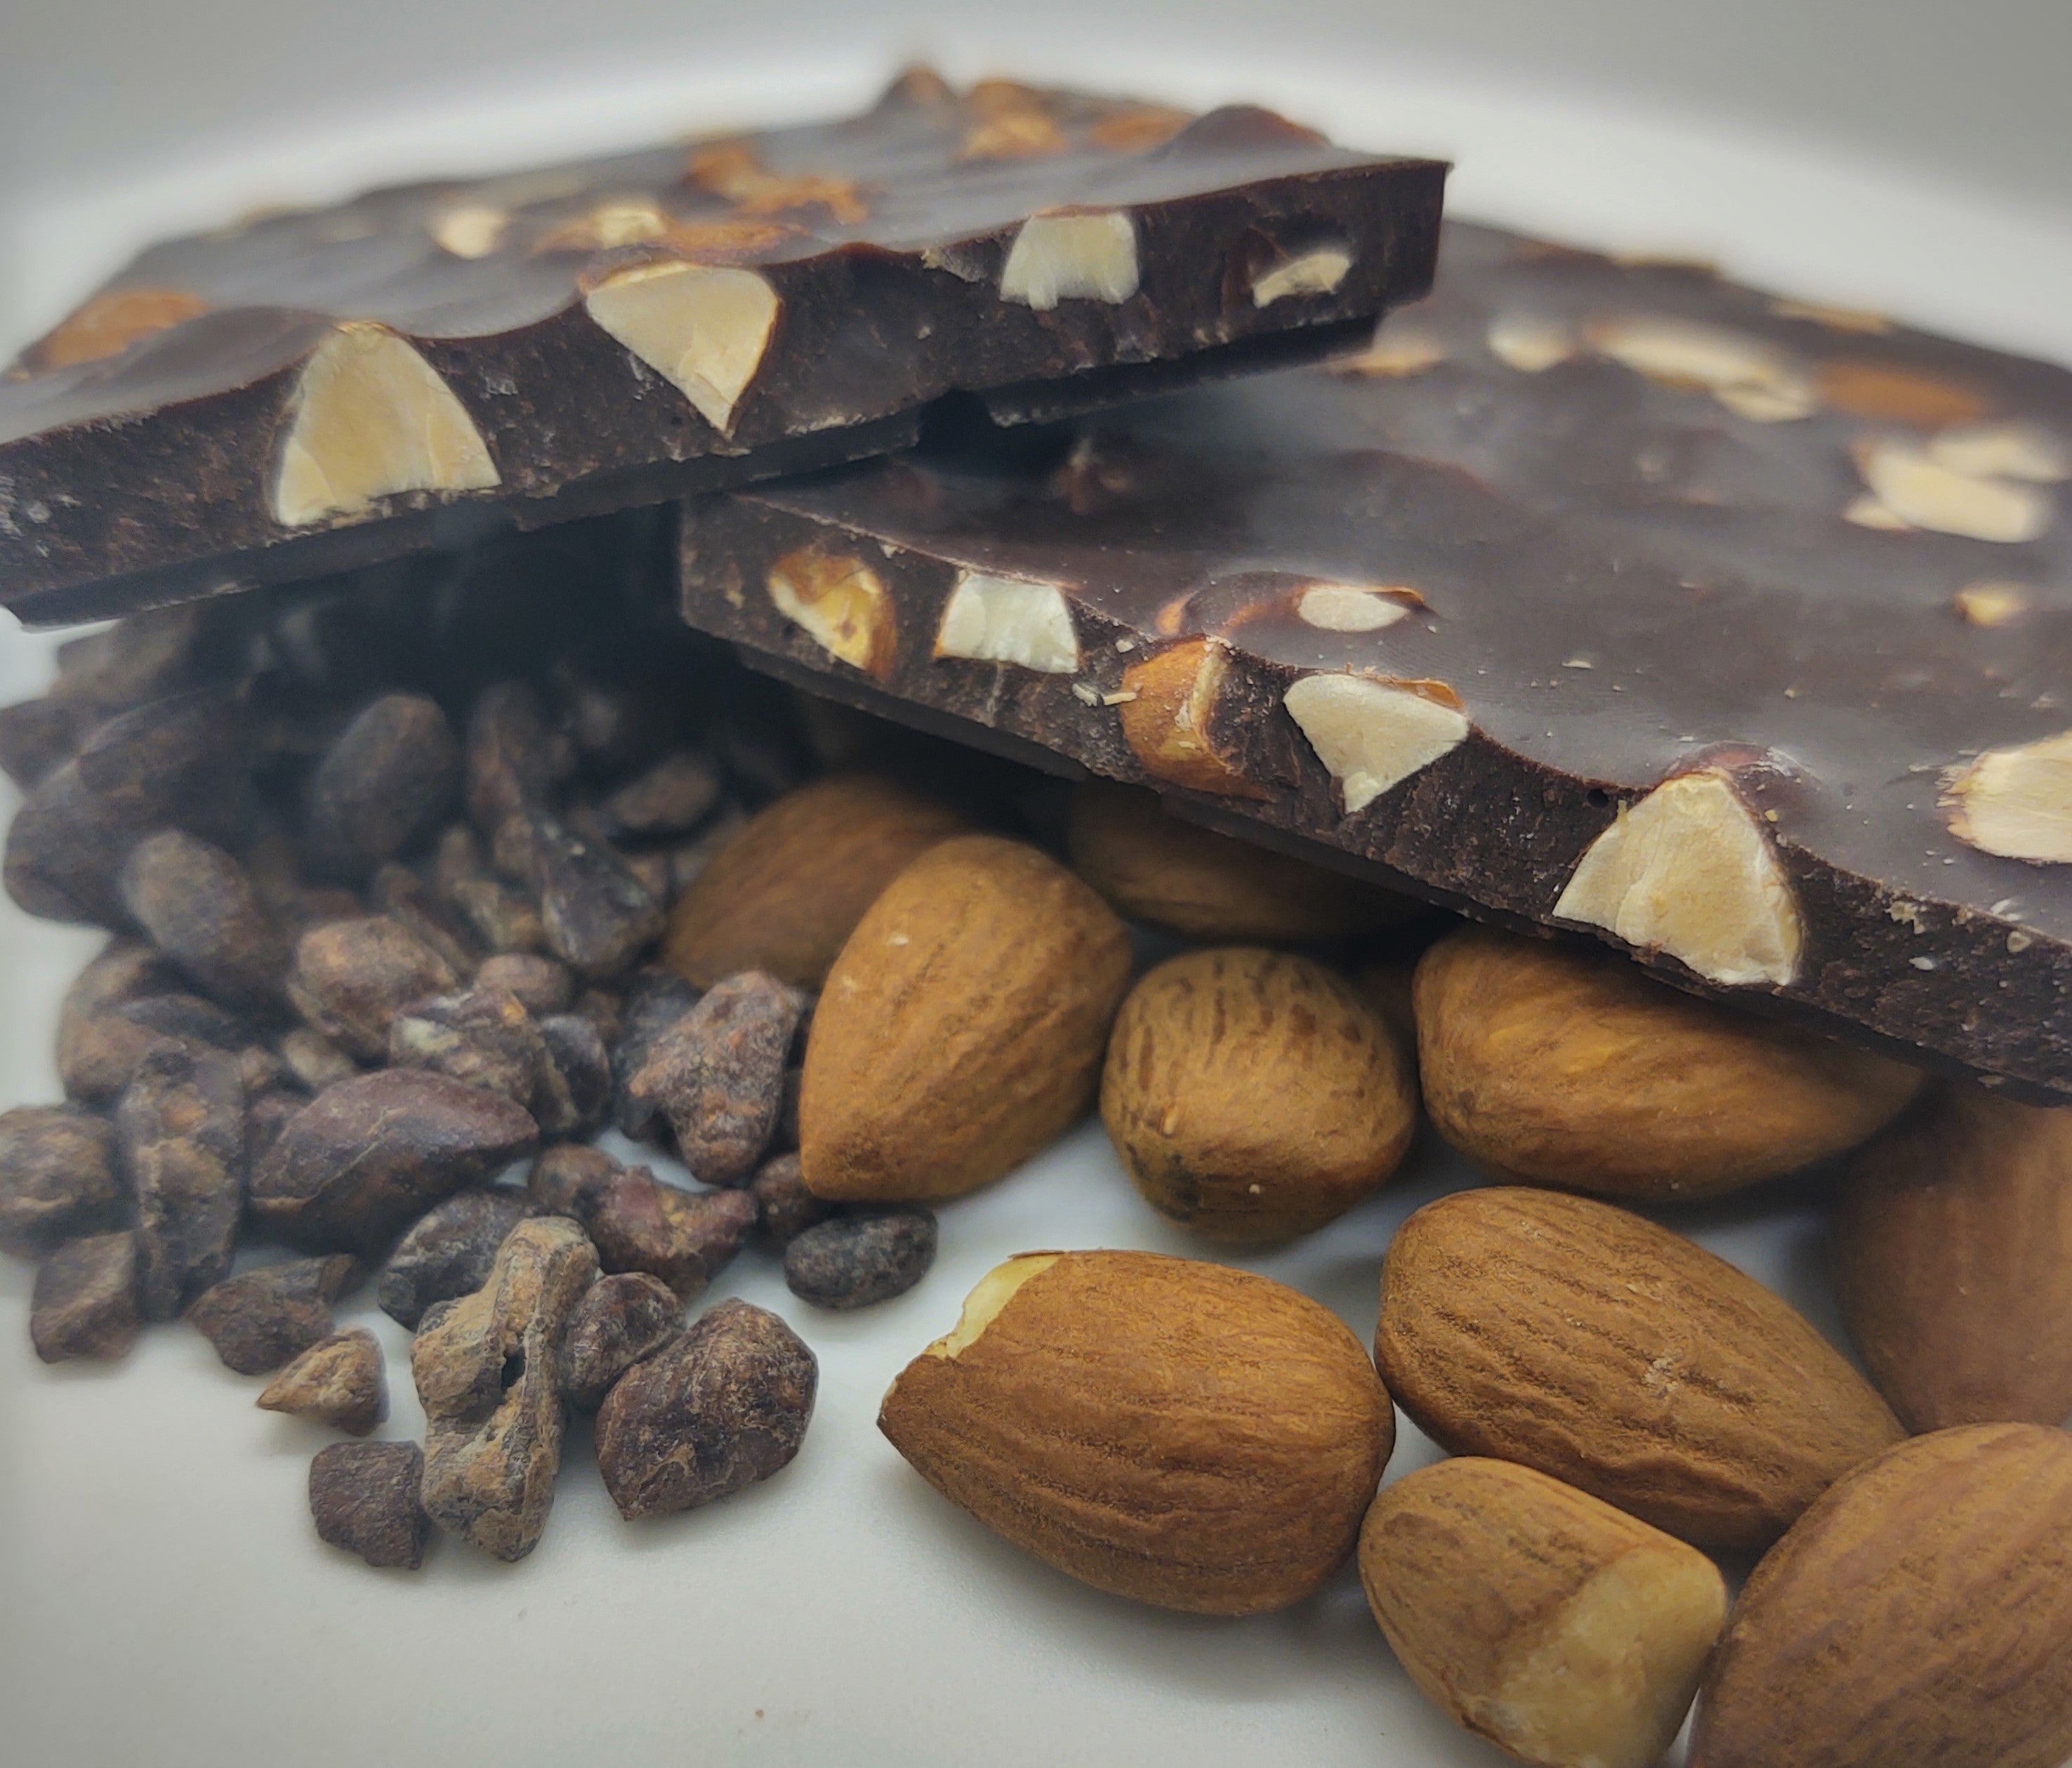 Pictured: solid dark chocolate bar with almonds. The bar is mounted by cocoa nibs and whole, roasted almonds